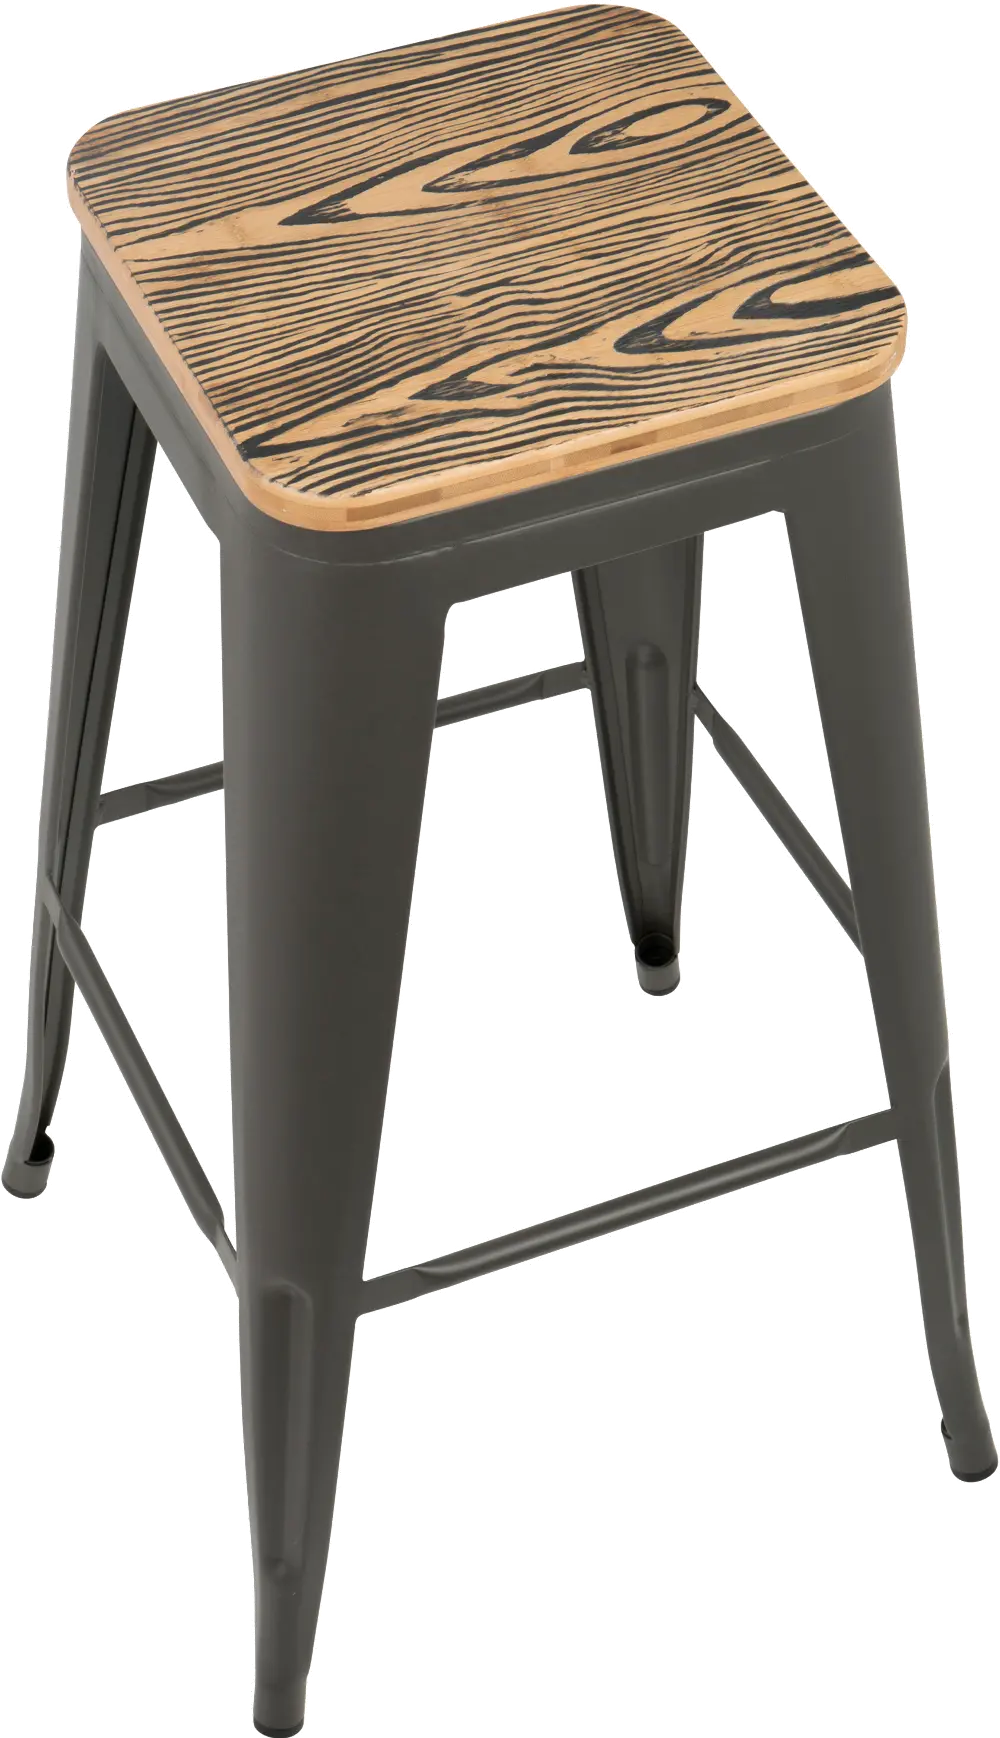 BS-TW-OR-BN-GY2 Industrial Gray Stackable Bar Stool (Set of 2)- Oregon-1